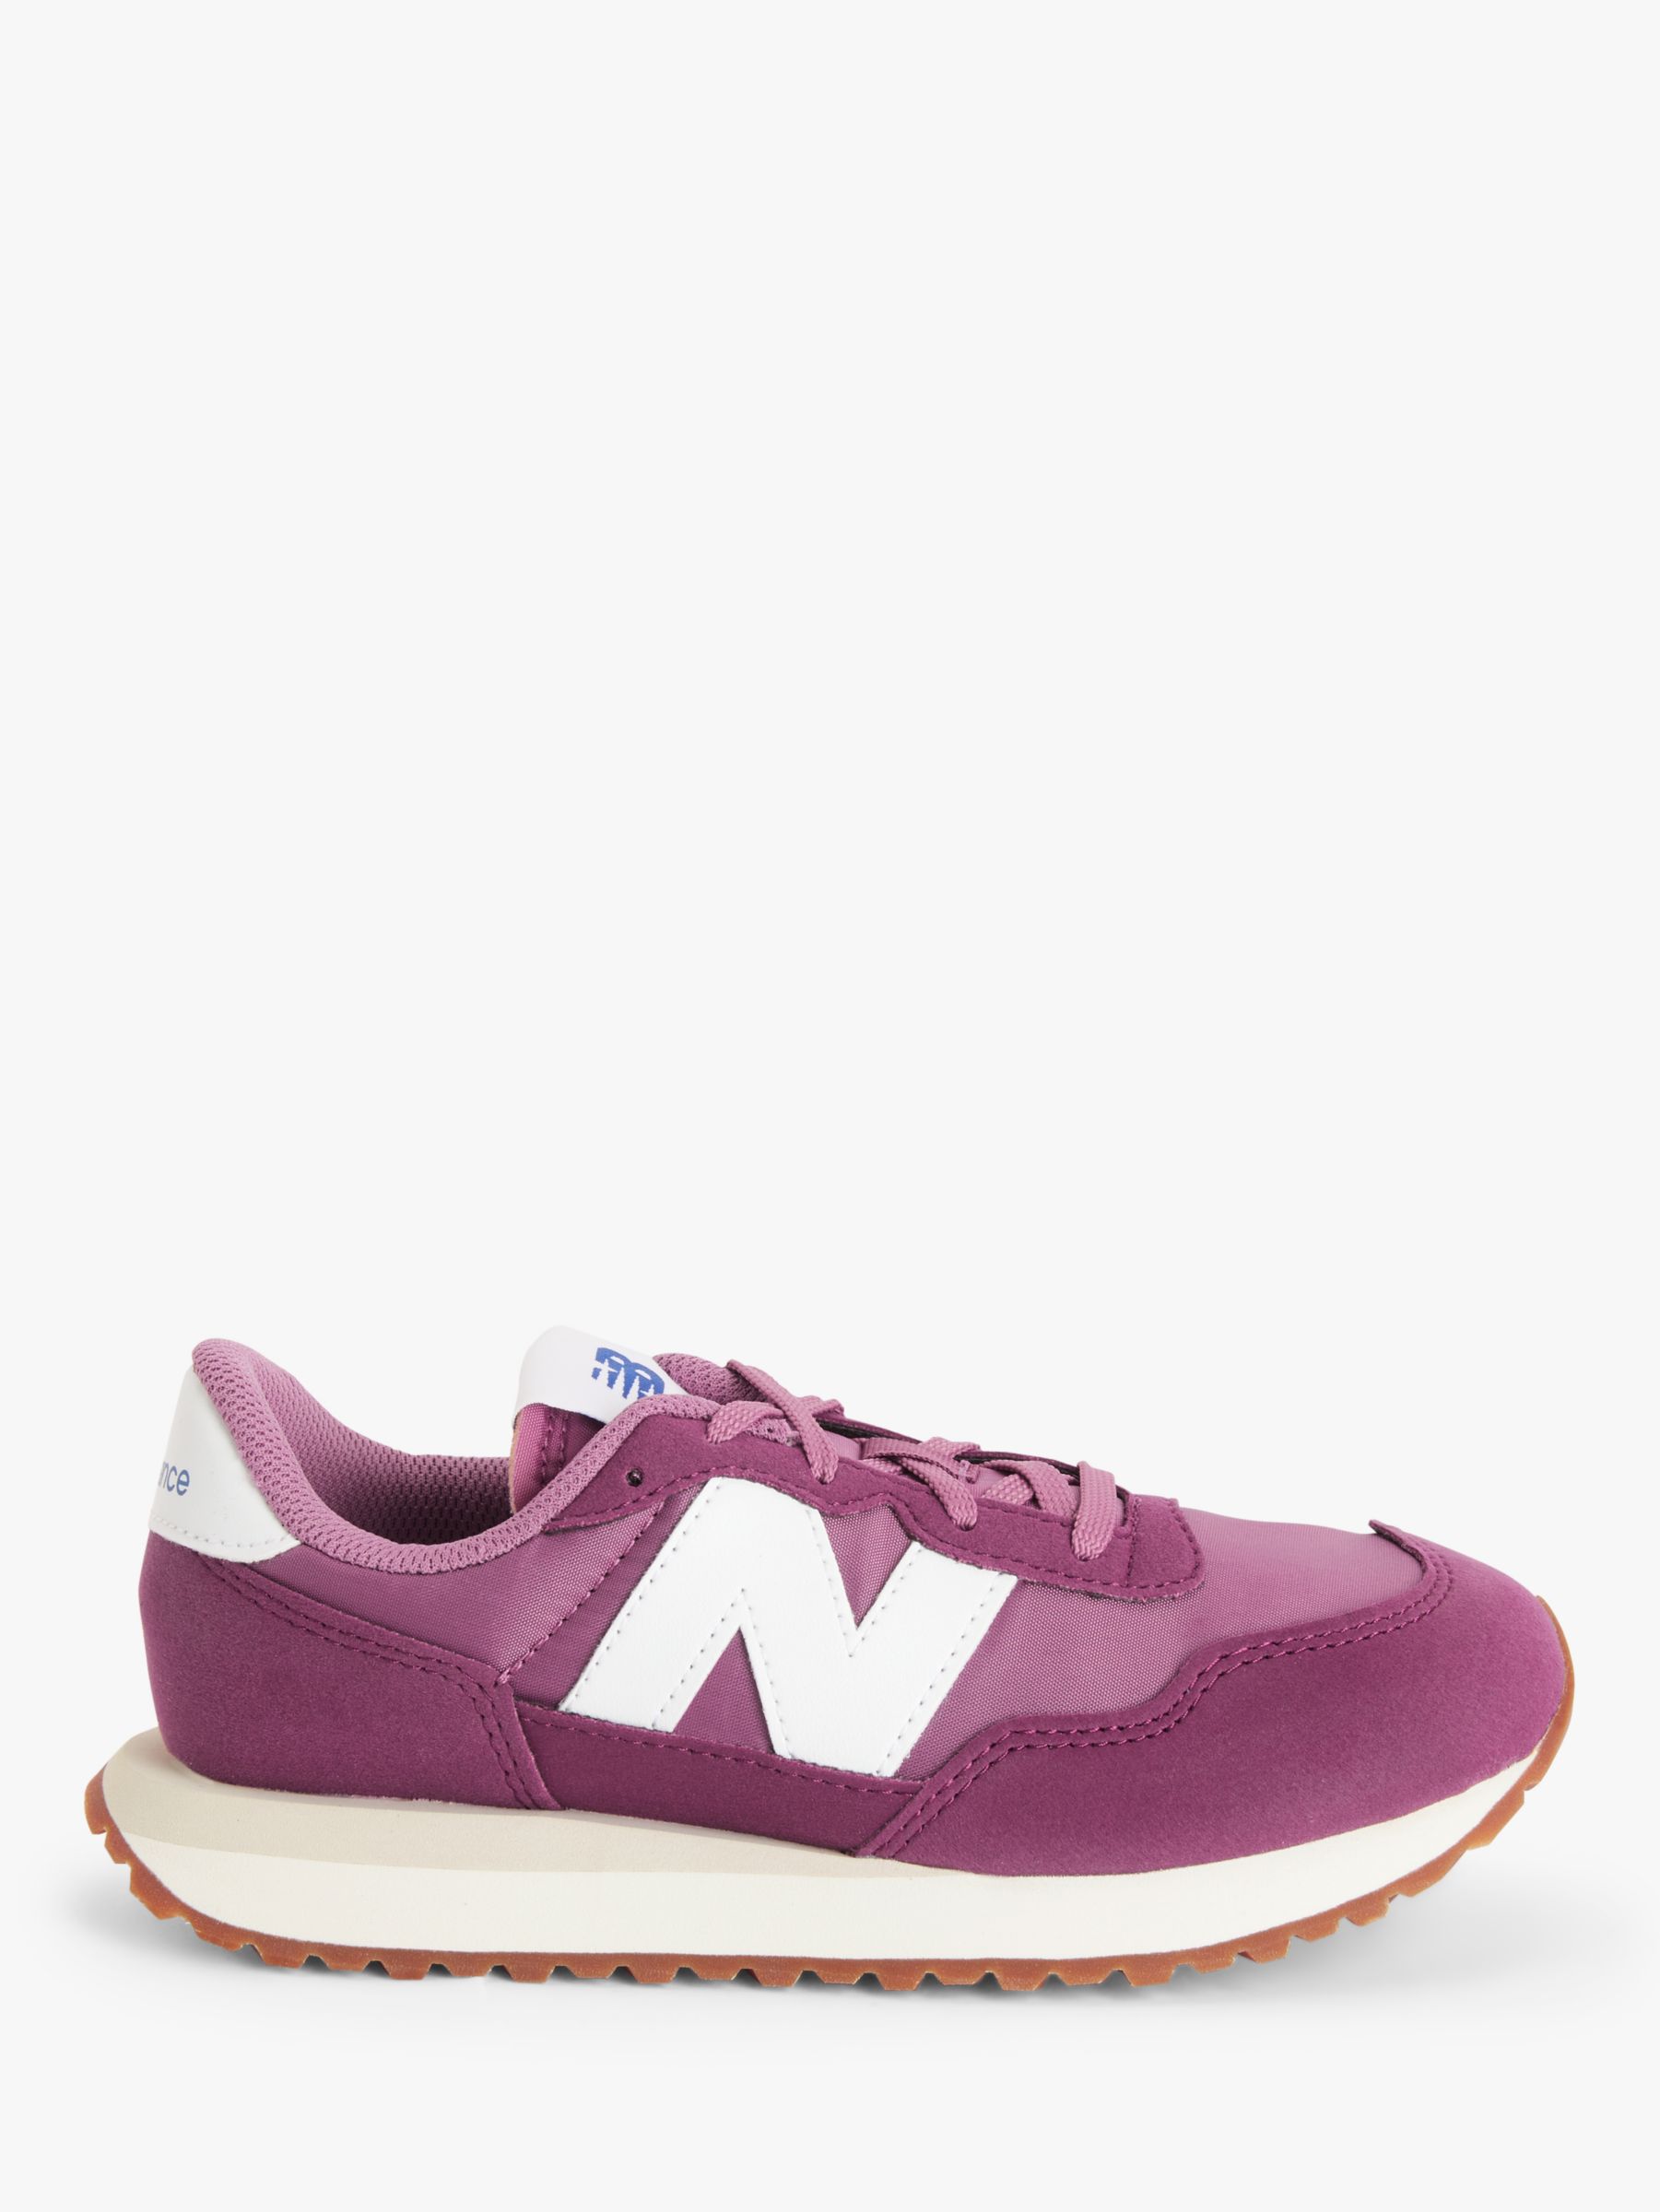 New Balance Kids' 237 Bungee Trainers, Ember/Raisin at Lewis & Partners